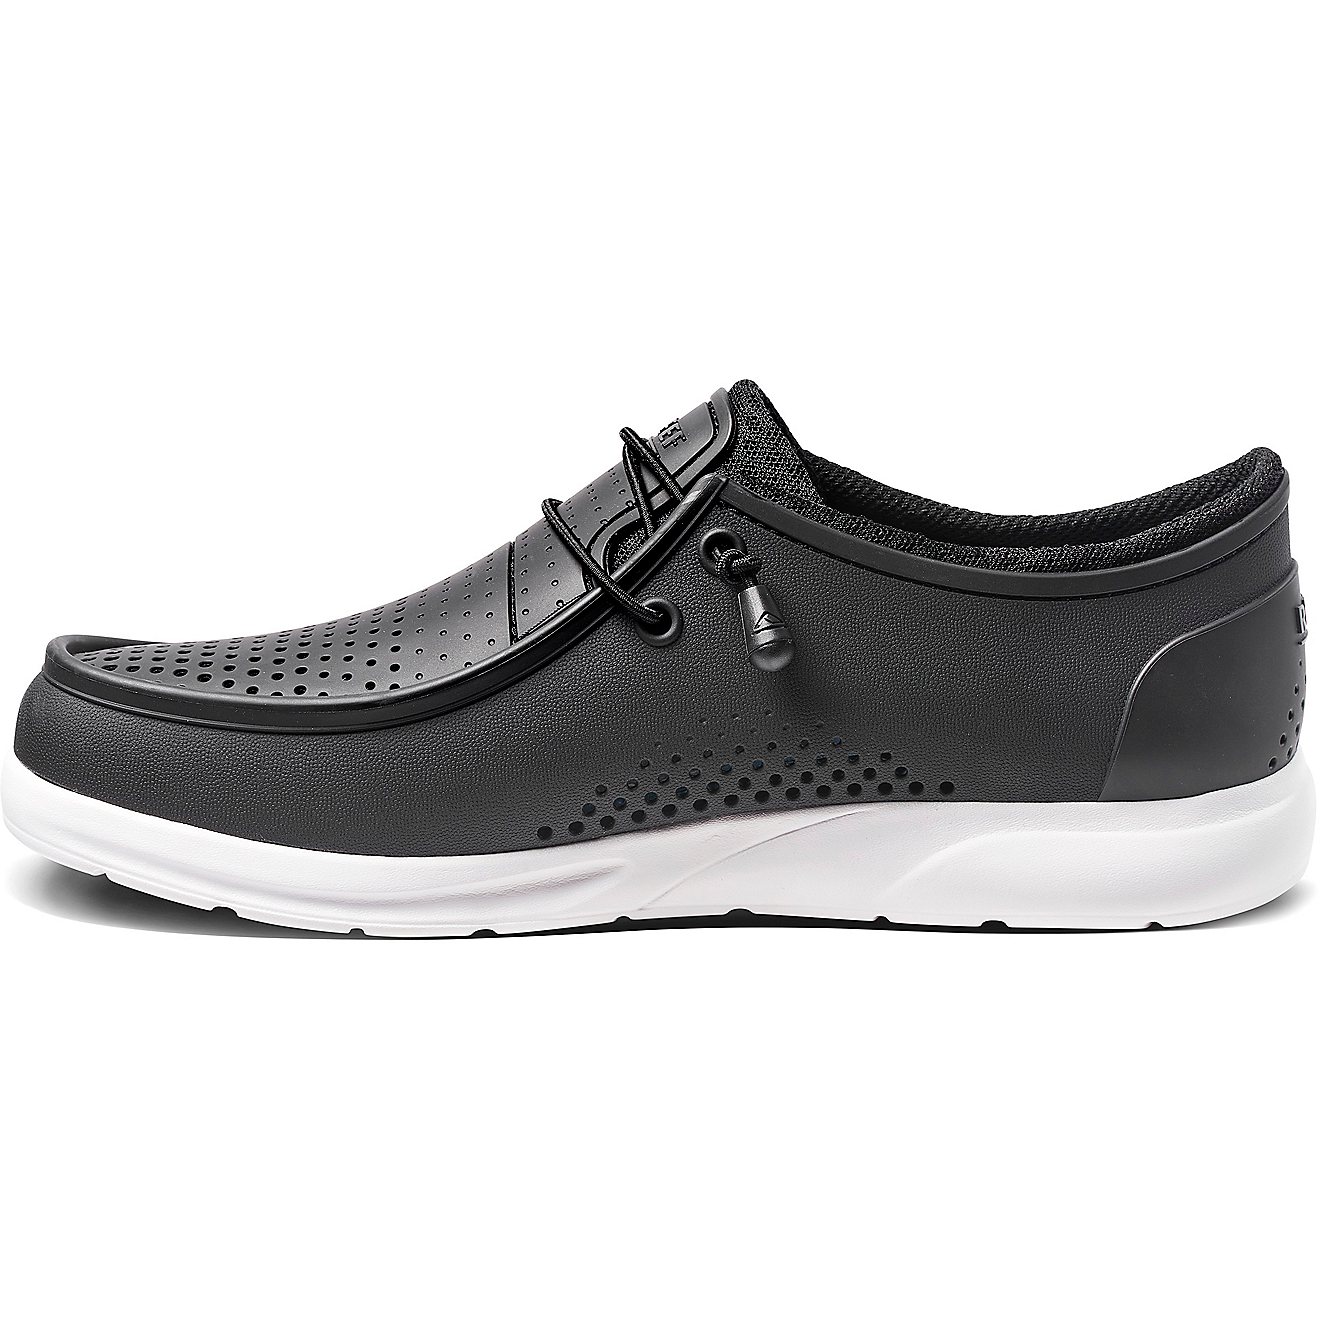 Reef Men's Water Coast Slip On Shoes | Free Shipping at Academy